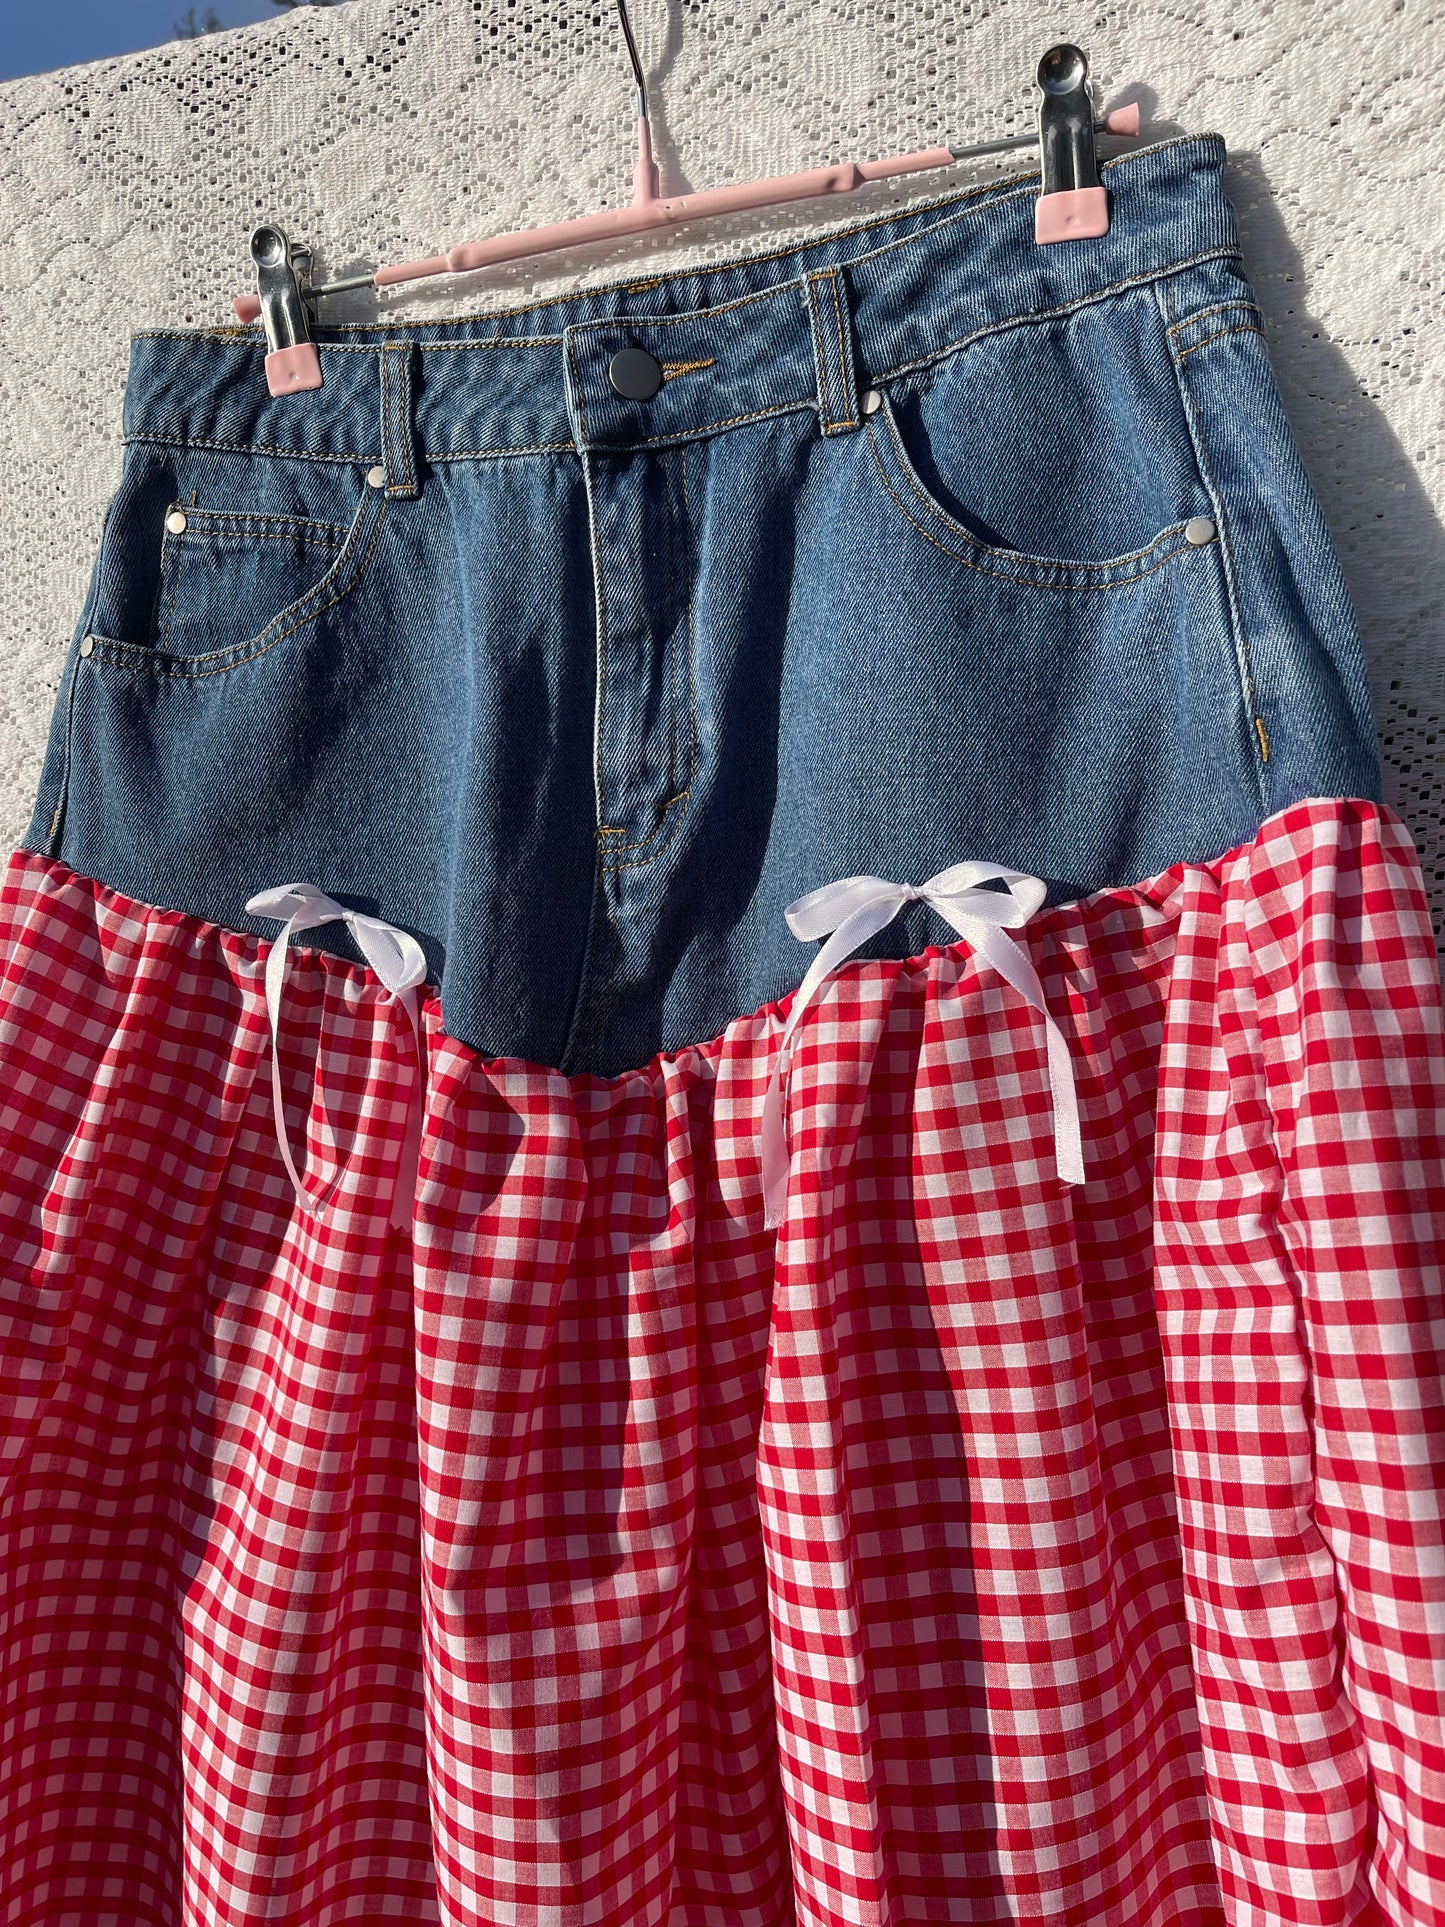 Denim and red gingham maxi skirt